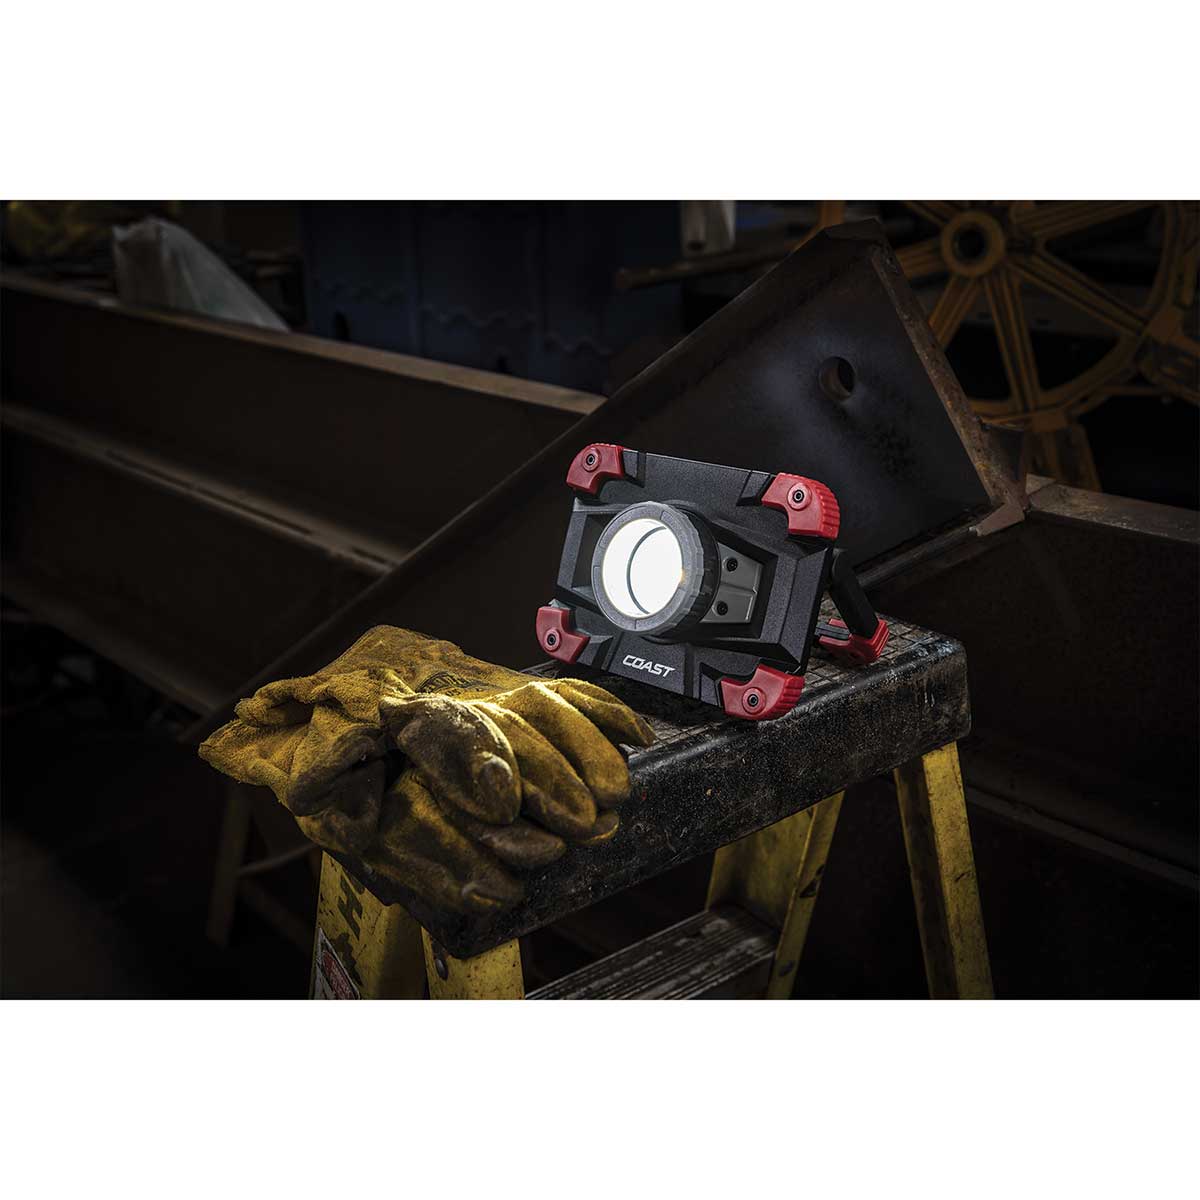 Coast Rechargeable Clamp Work Light